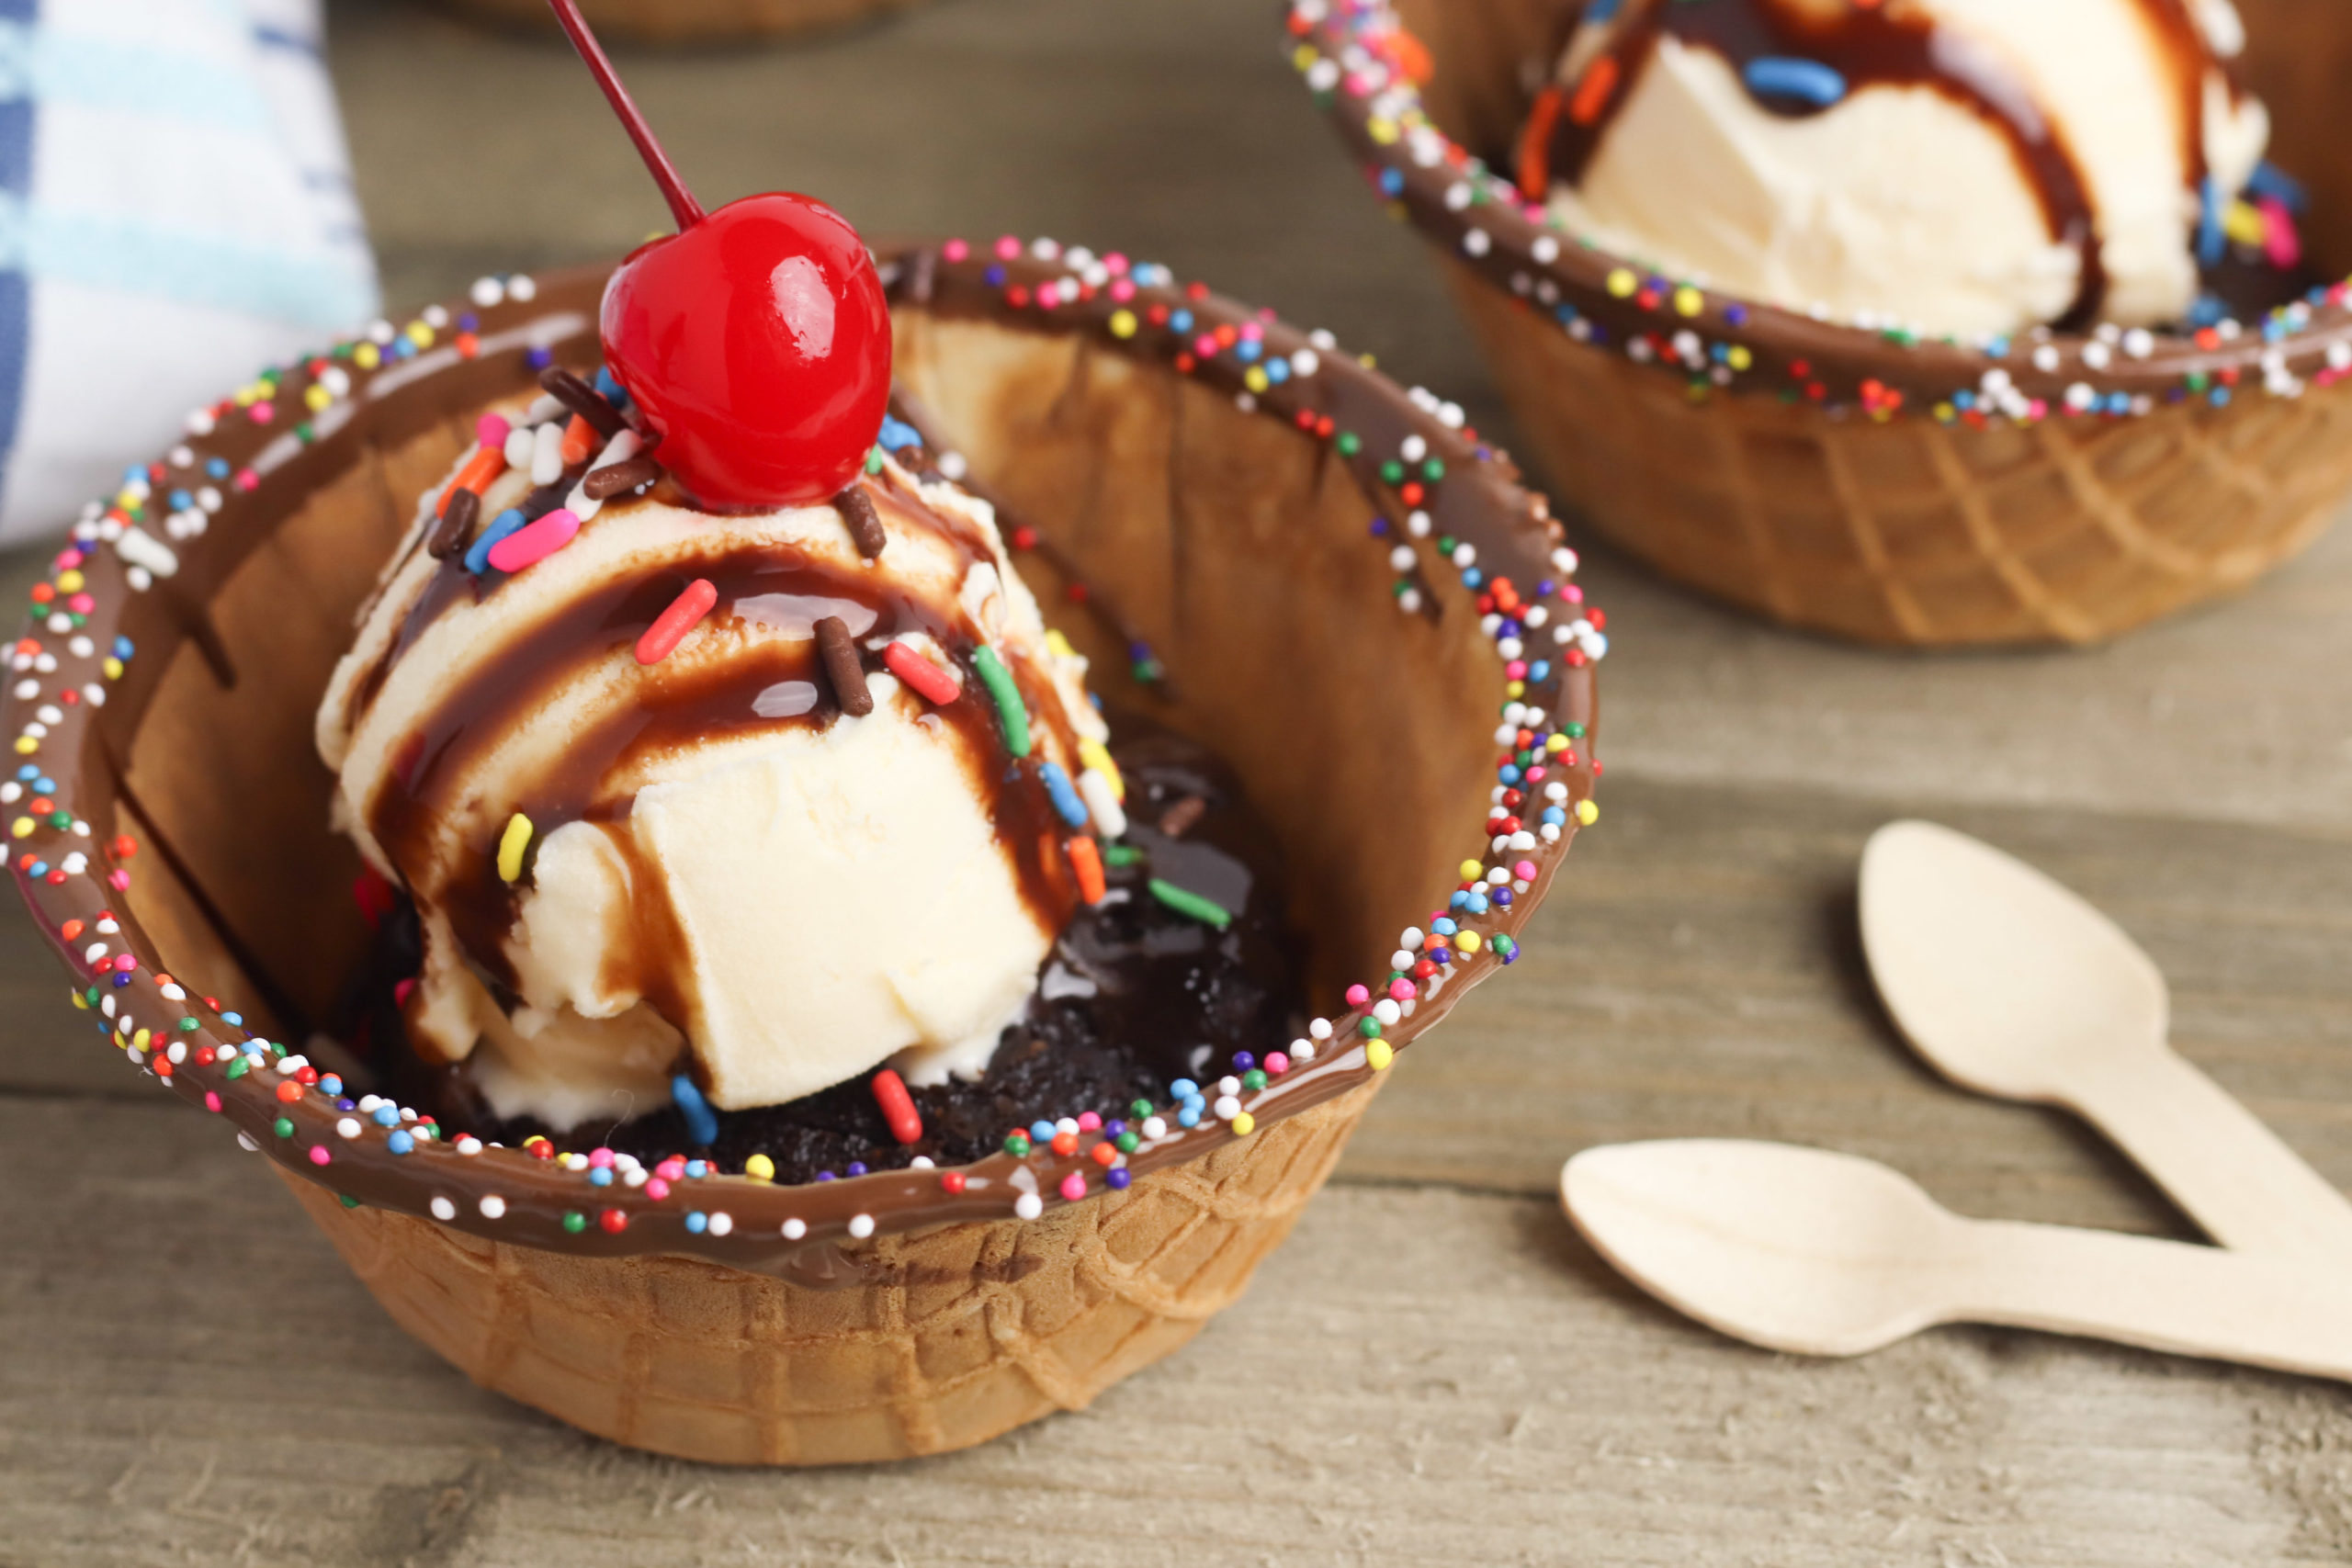 You Can Have A Waffle Bowl Now